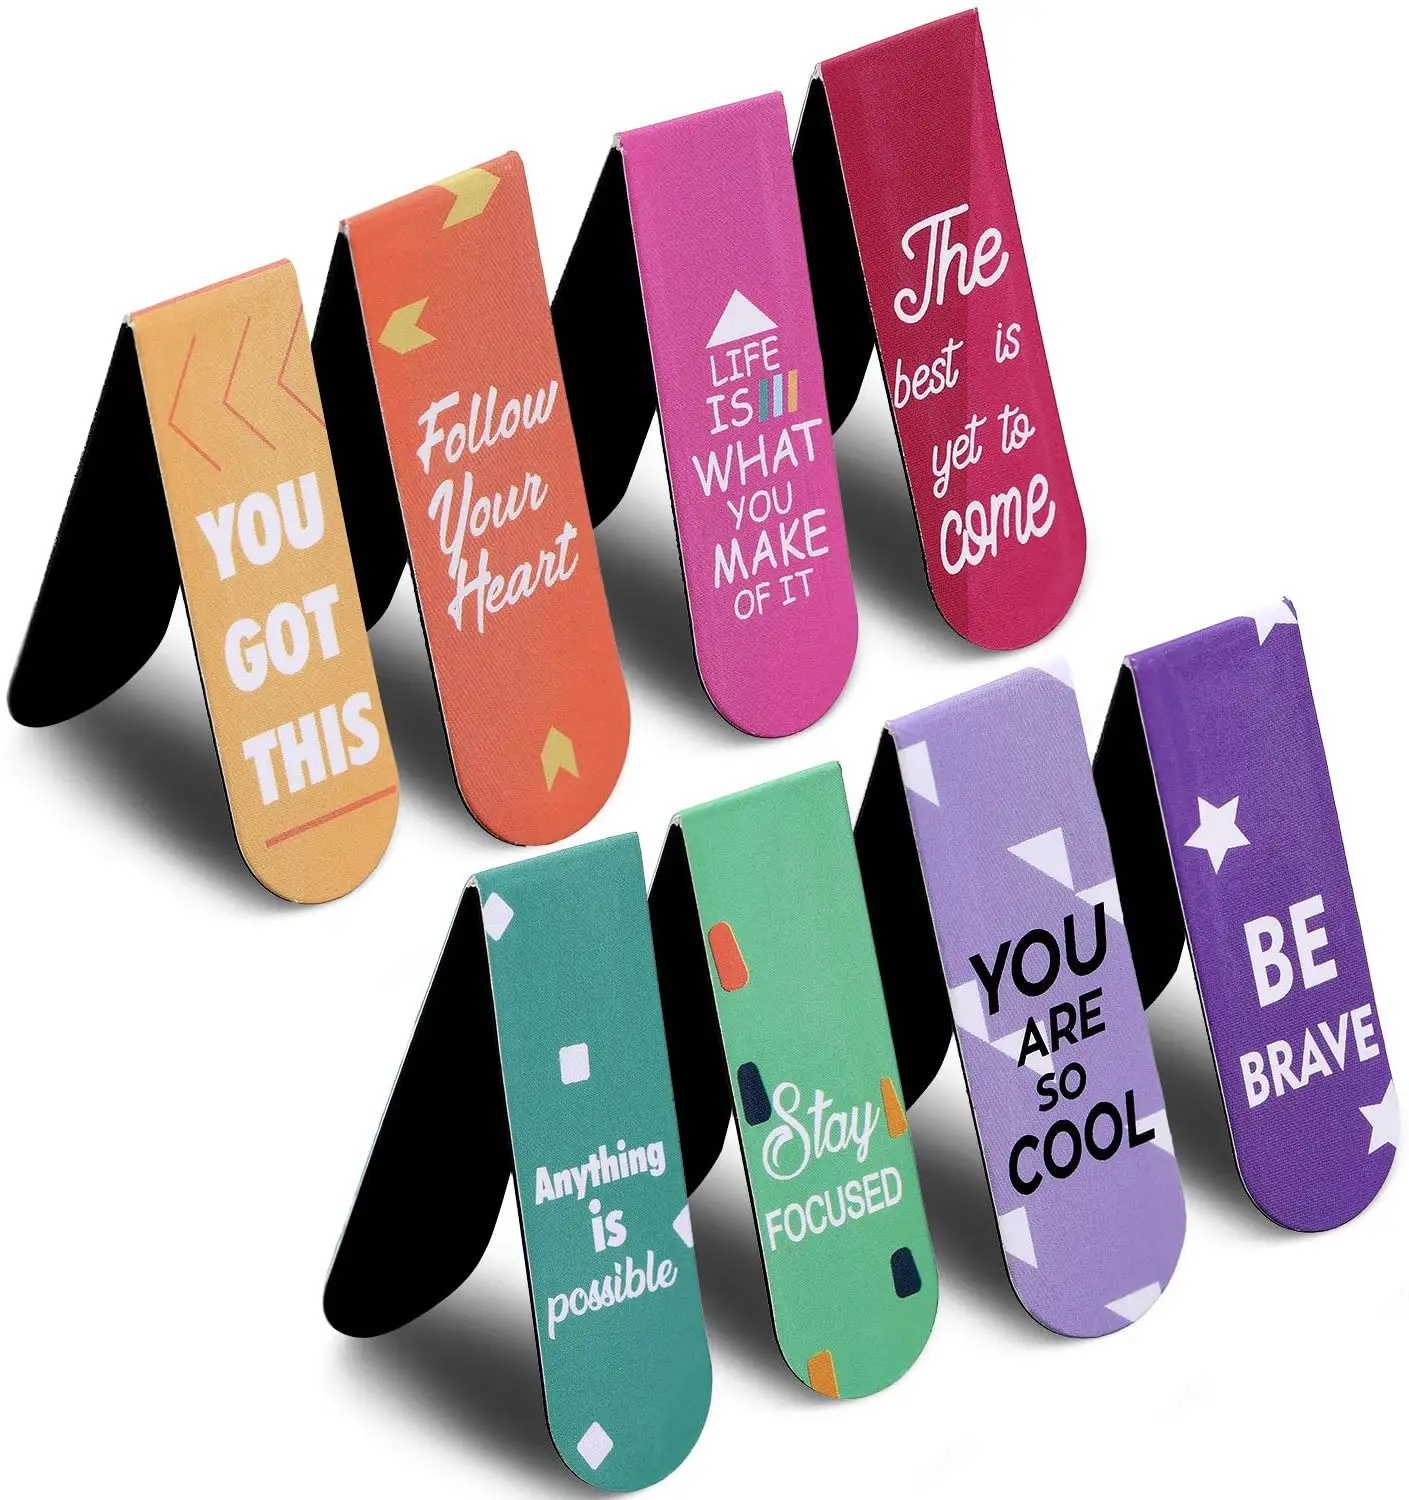 Positive Magnetic Page Clips Custom Magnetic Bookmarks for Students Teachers School Home Office Supplies